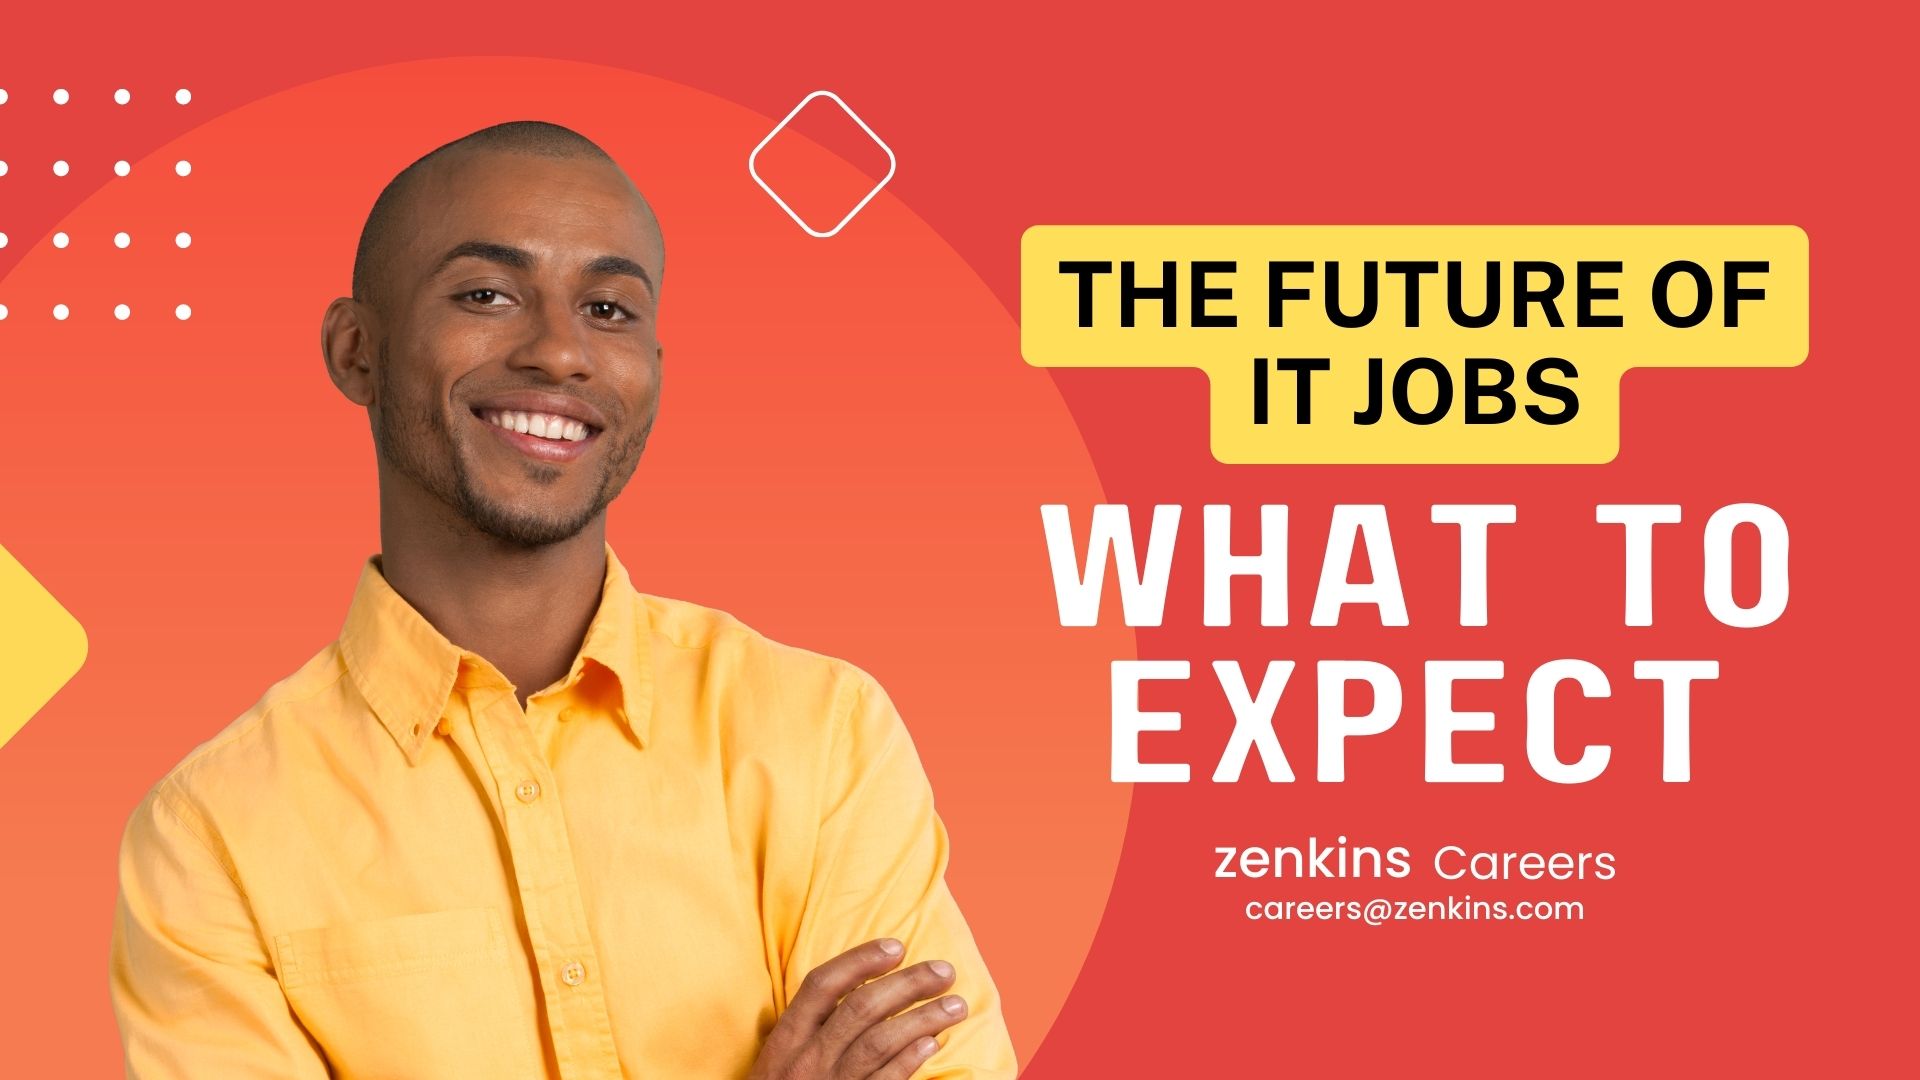 The Future of IT Jobs